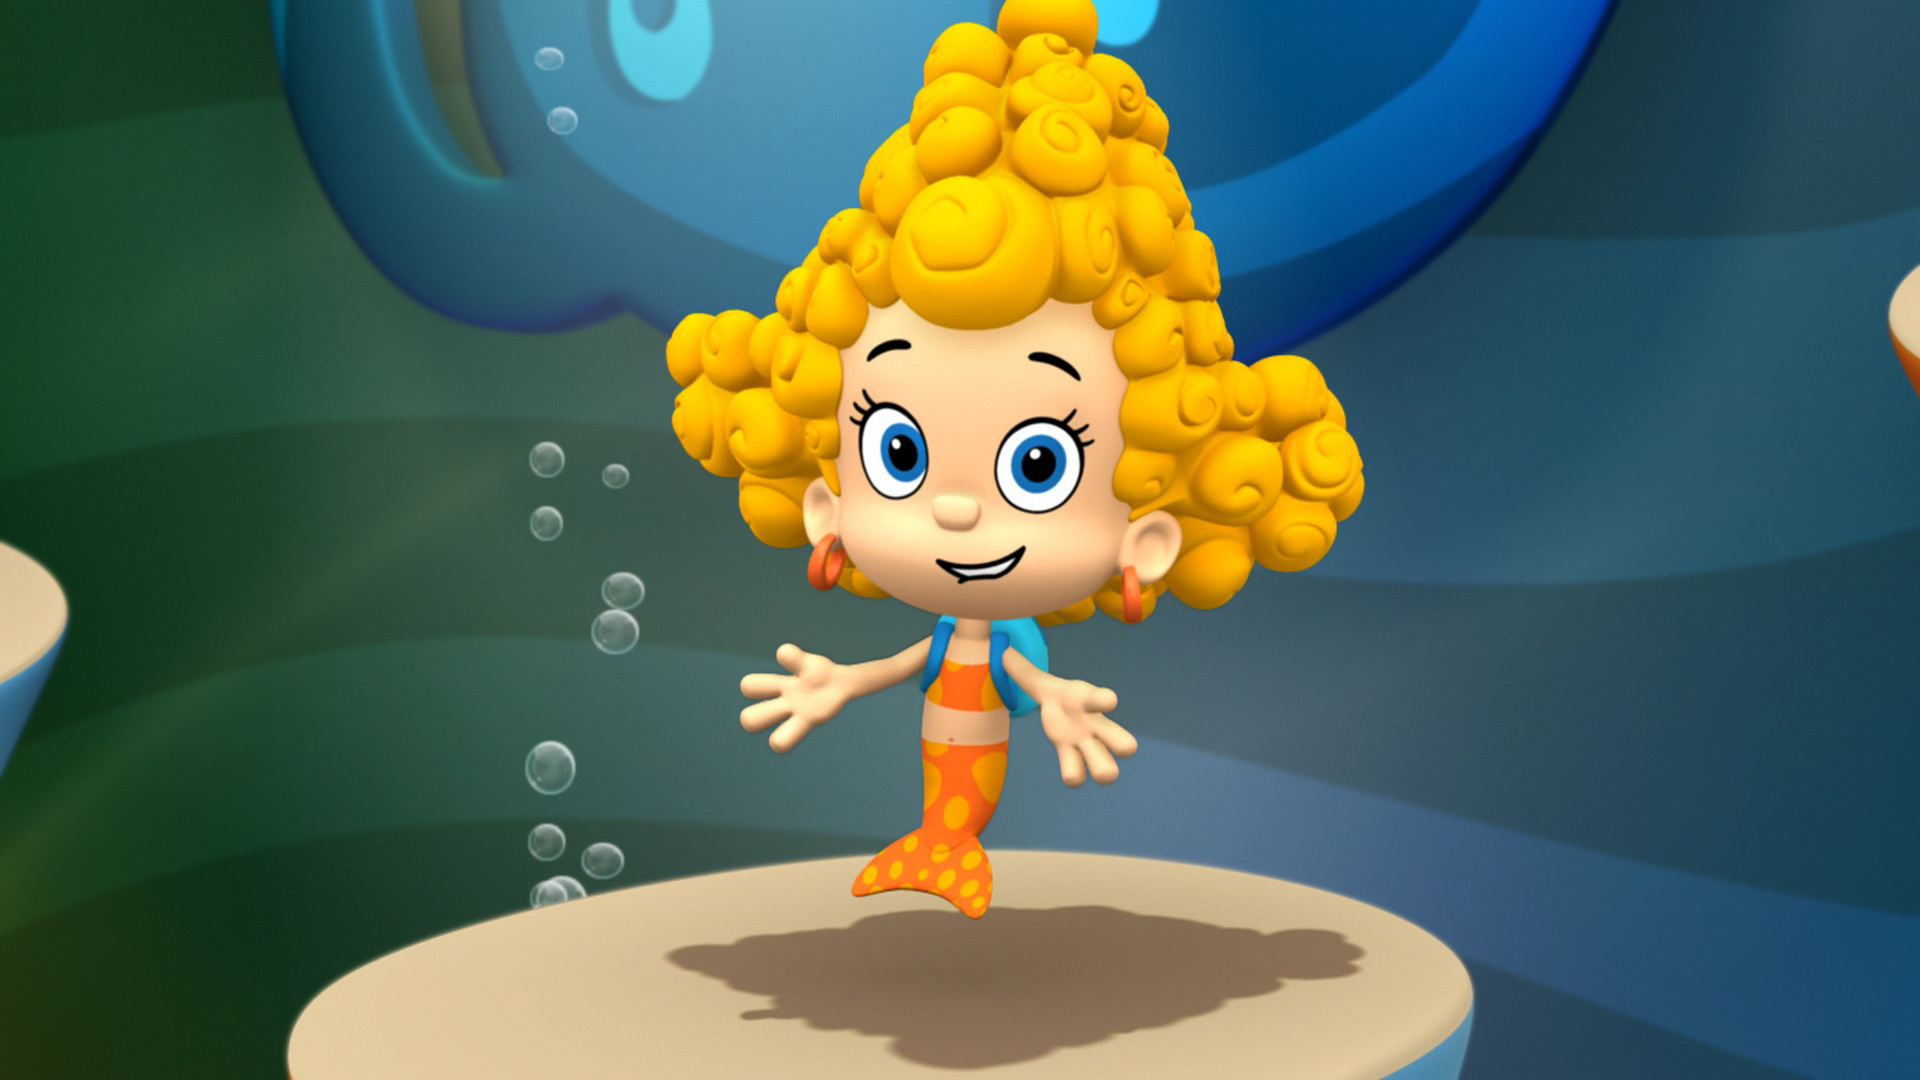 Watch Bubble Guppies Season 3 Episode 1 Get Ready For School Full Show On Paramount Plus